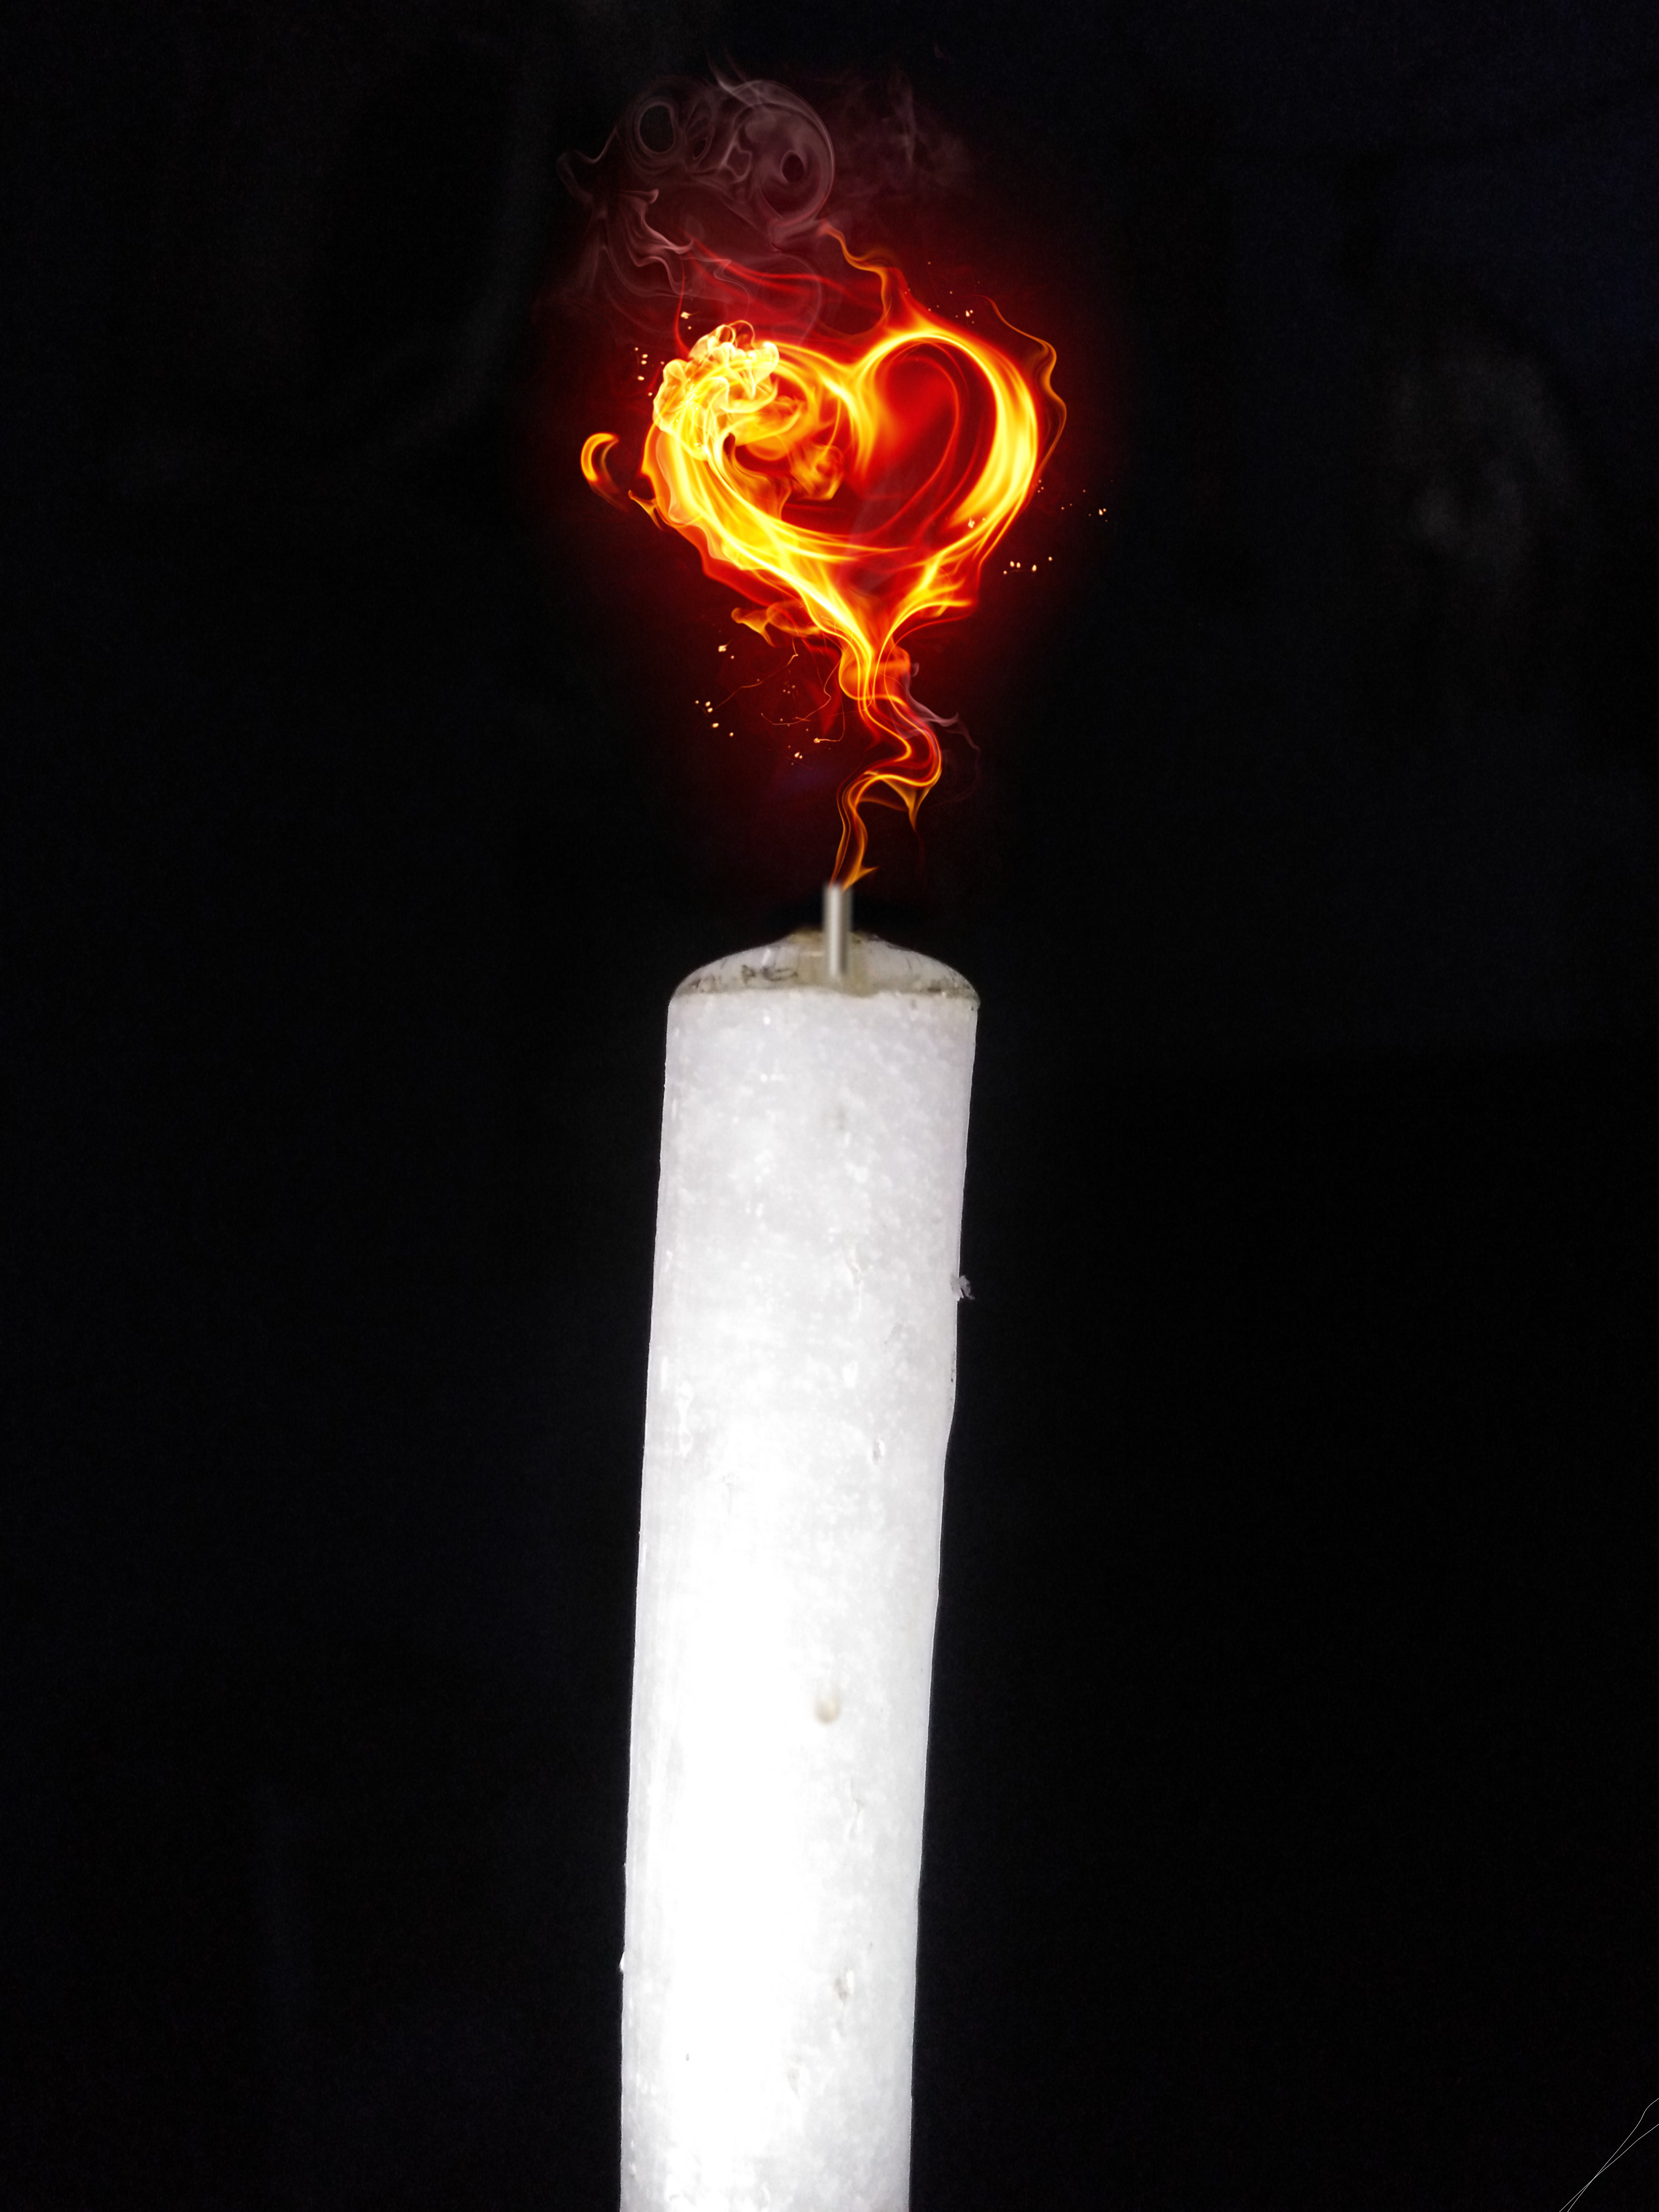 Flame in heart shape on candle